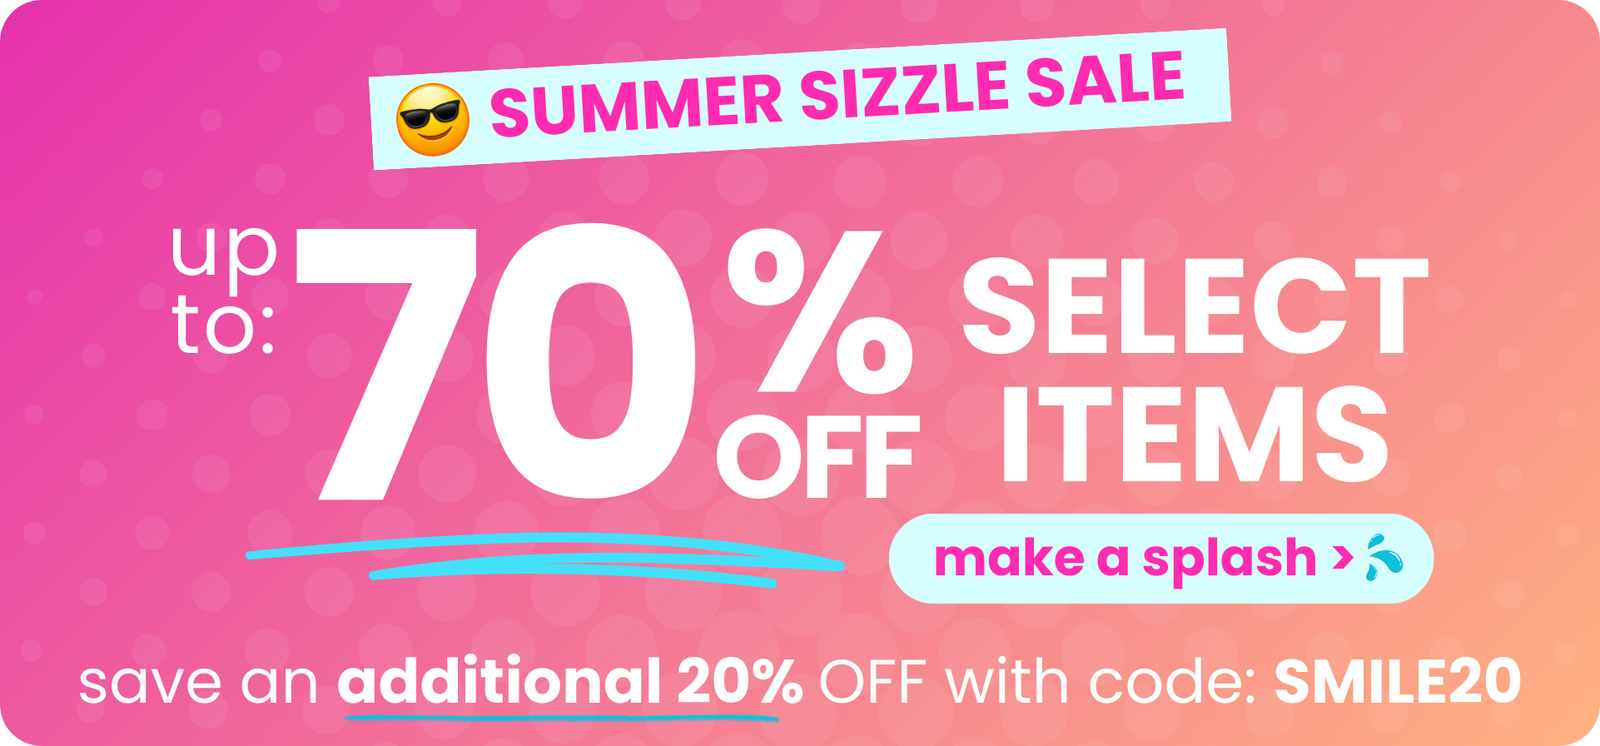 Click here to shop our summer outlet sale! Get up to 70% OFF select items. Save an additional 20% off with code: SMILE20